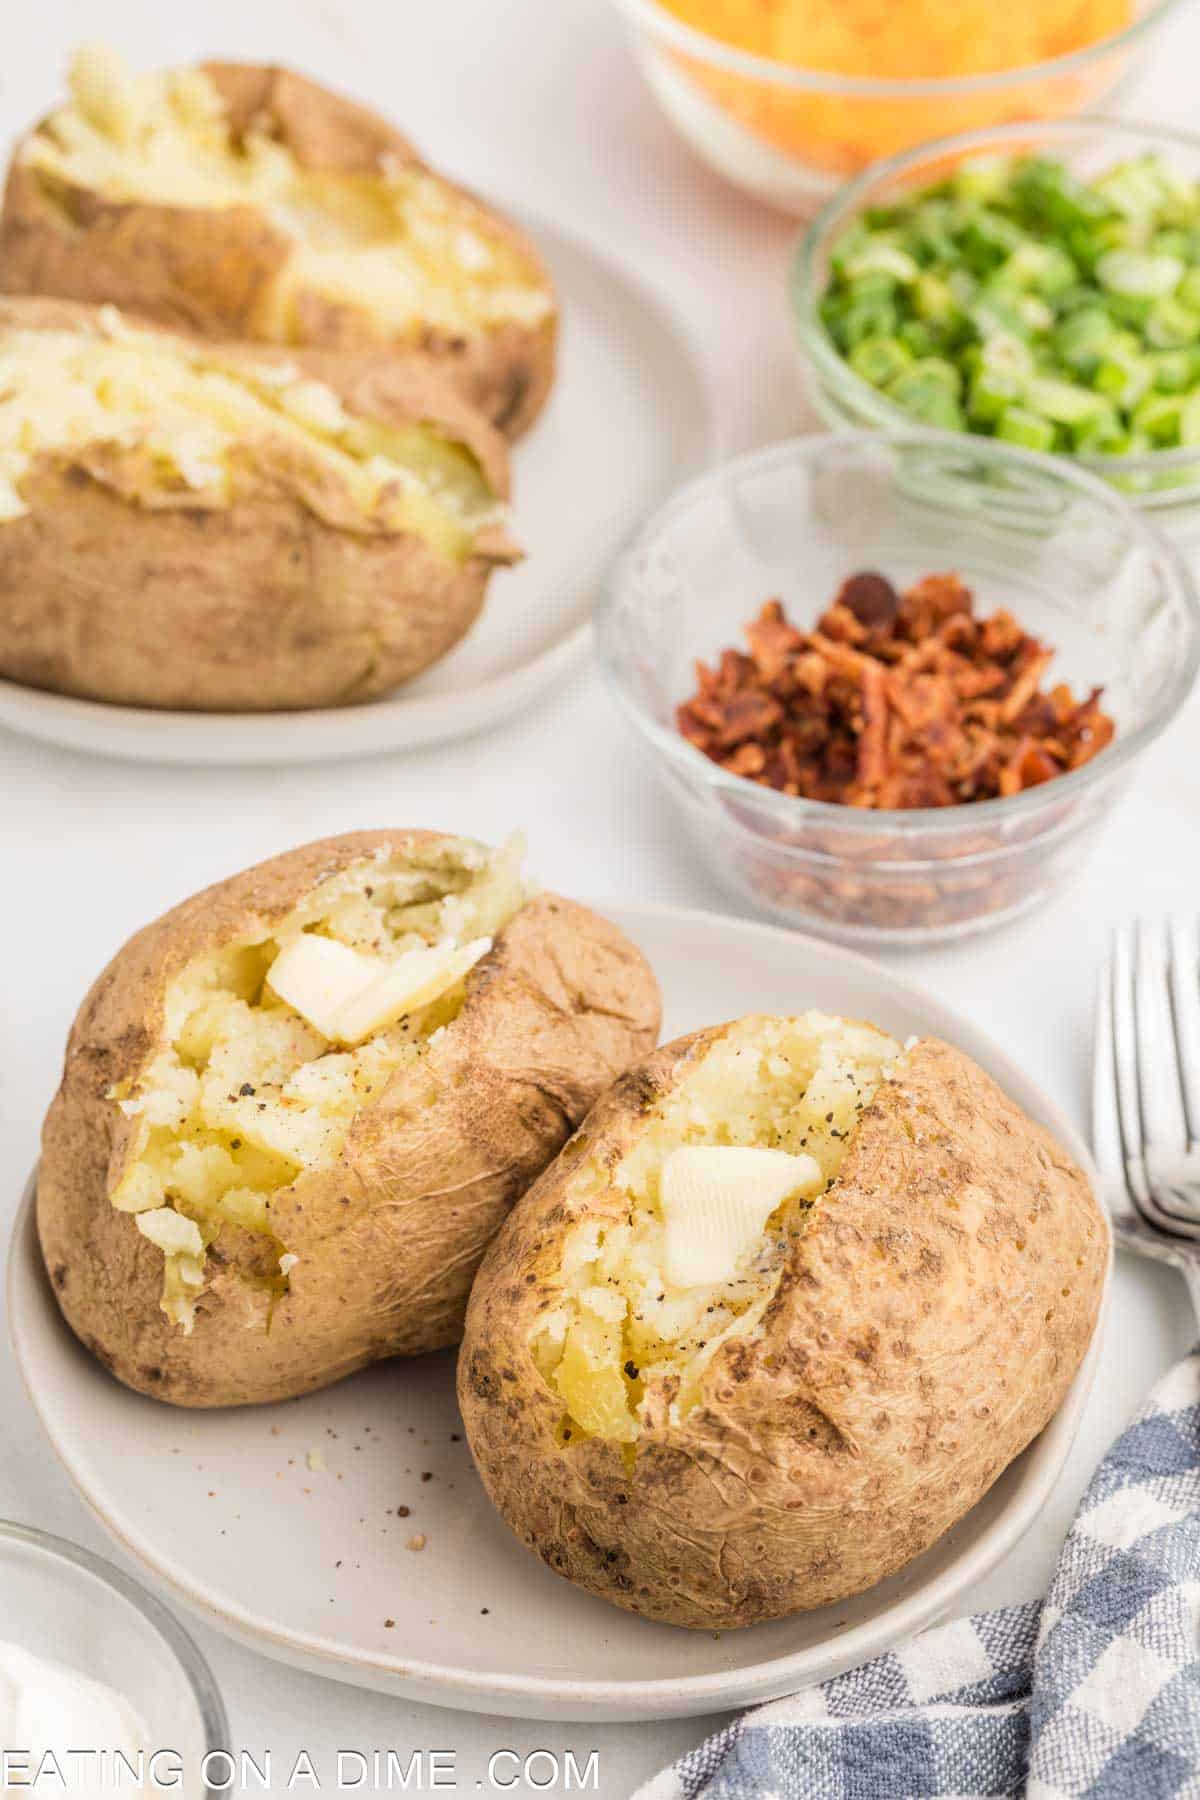 Bake Potatoes topped with butter